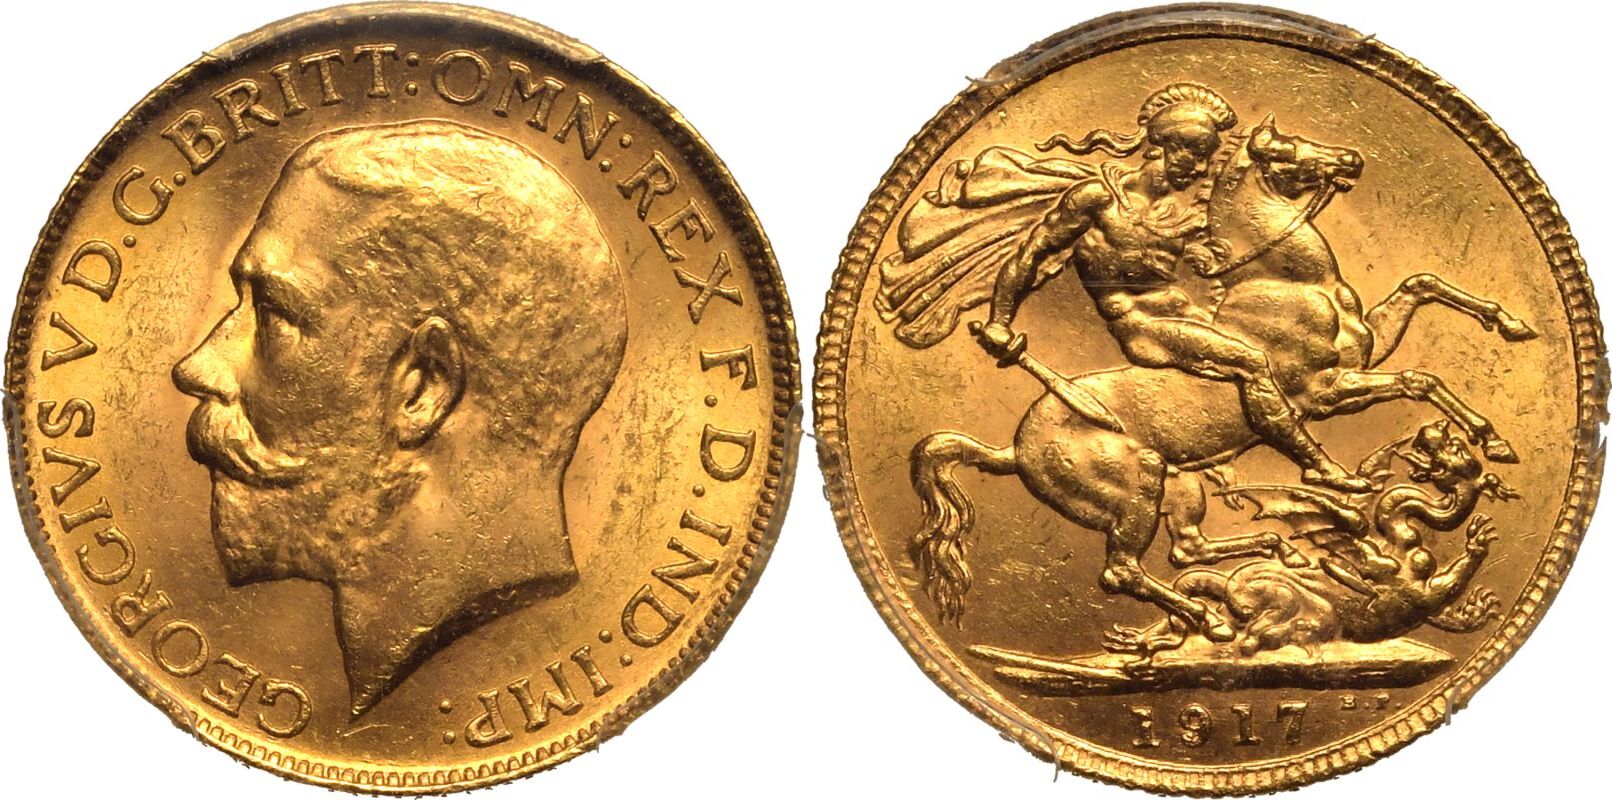 1917 C Gold Sovereign PCGS MS64